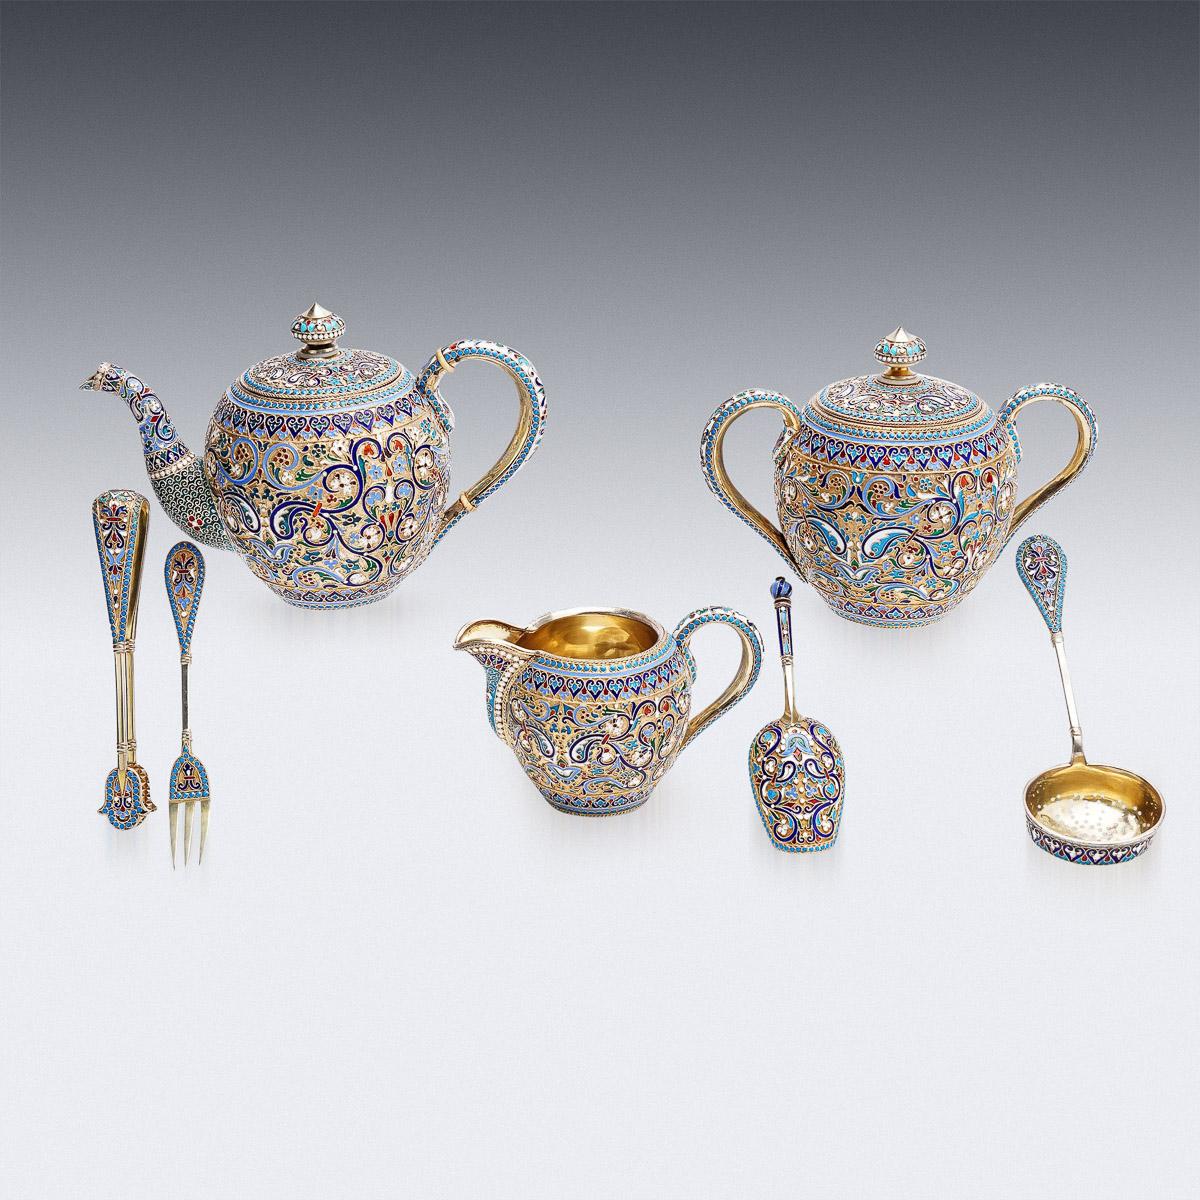 Antique late-19th Century Imperial Russian solid silver-gilt and cloisonne' enamel tea service, mid size and fine quality, richly gilt lobed bodies enamelled with shaded cloisonne' enamel. Hallmarked Russian silver 84 (875 standard), Moscow, 1890's,